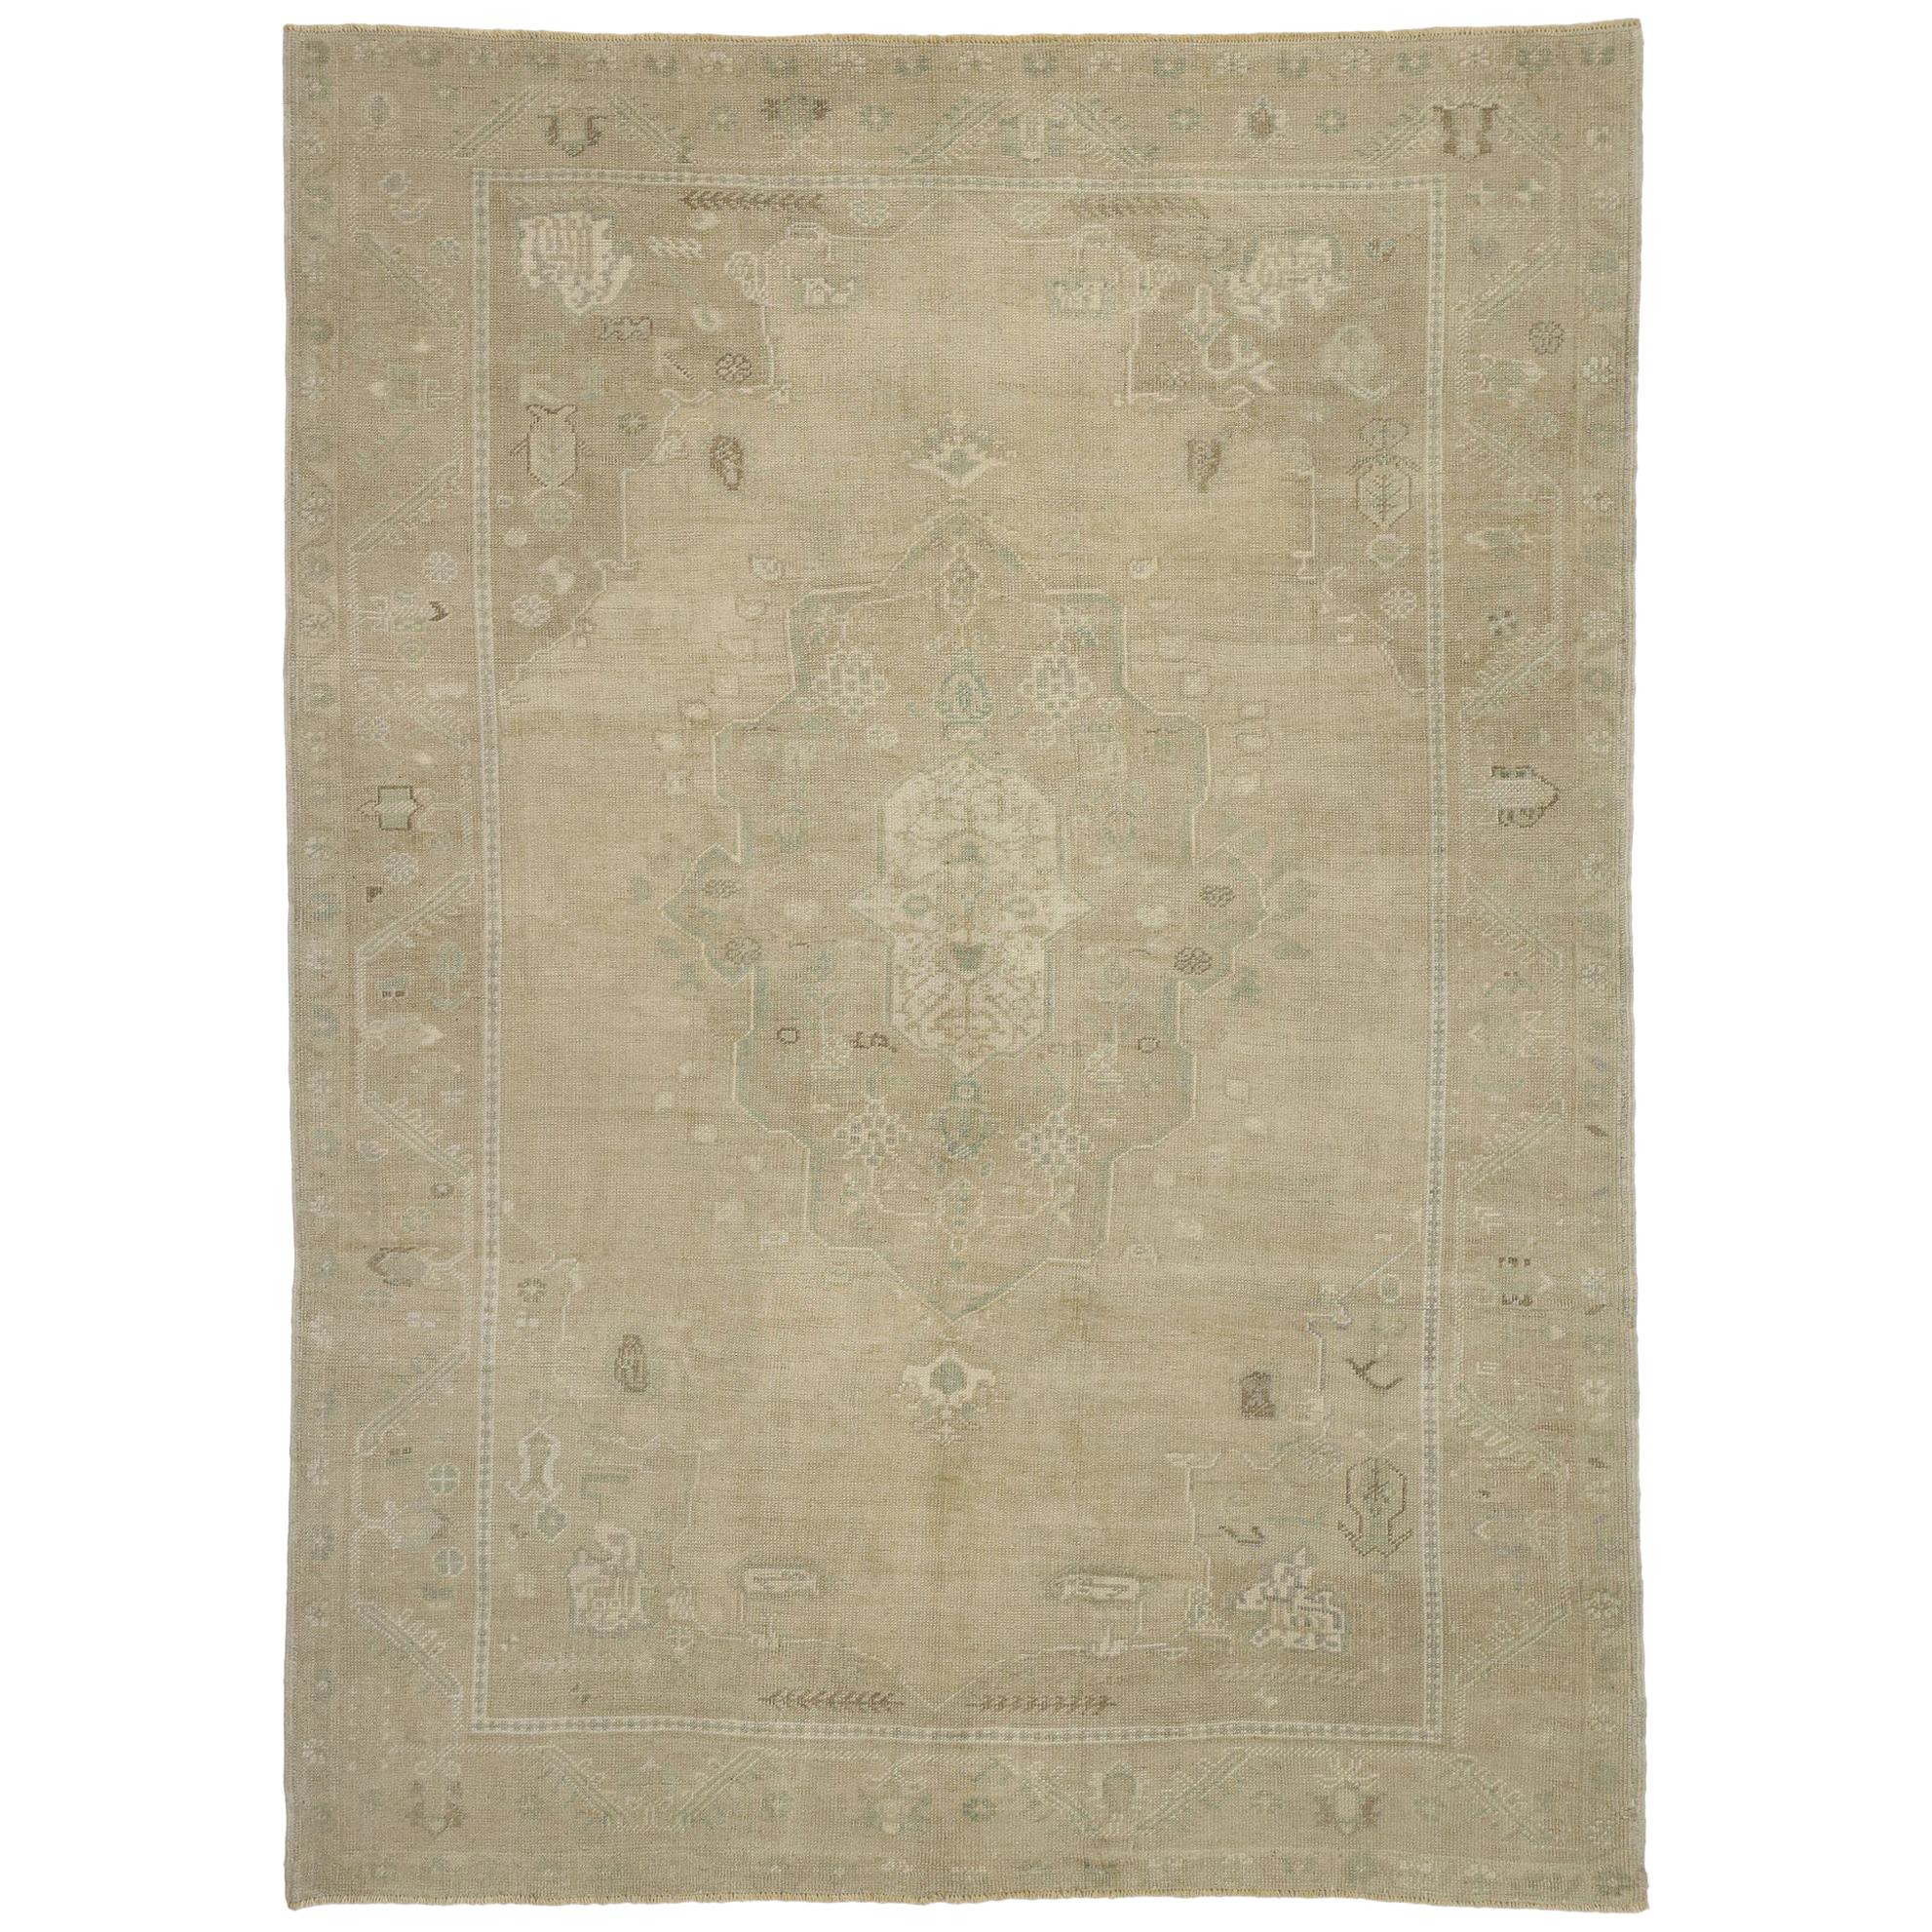 Vintage Turkish Oushak Rug with Monochromatic Mission Style and Muted Colors